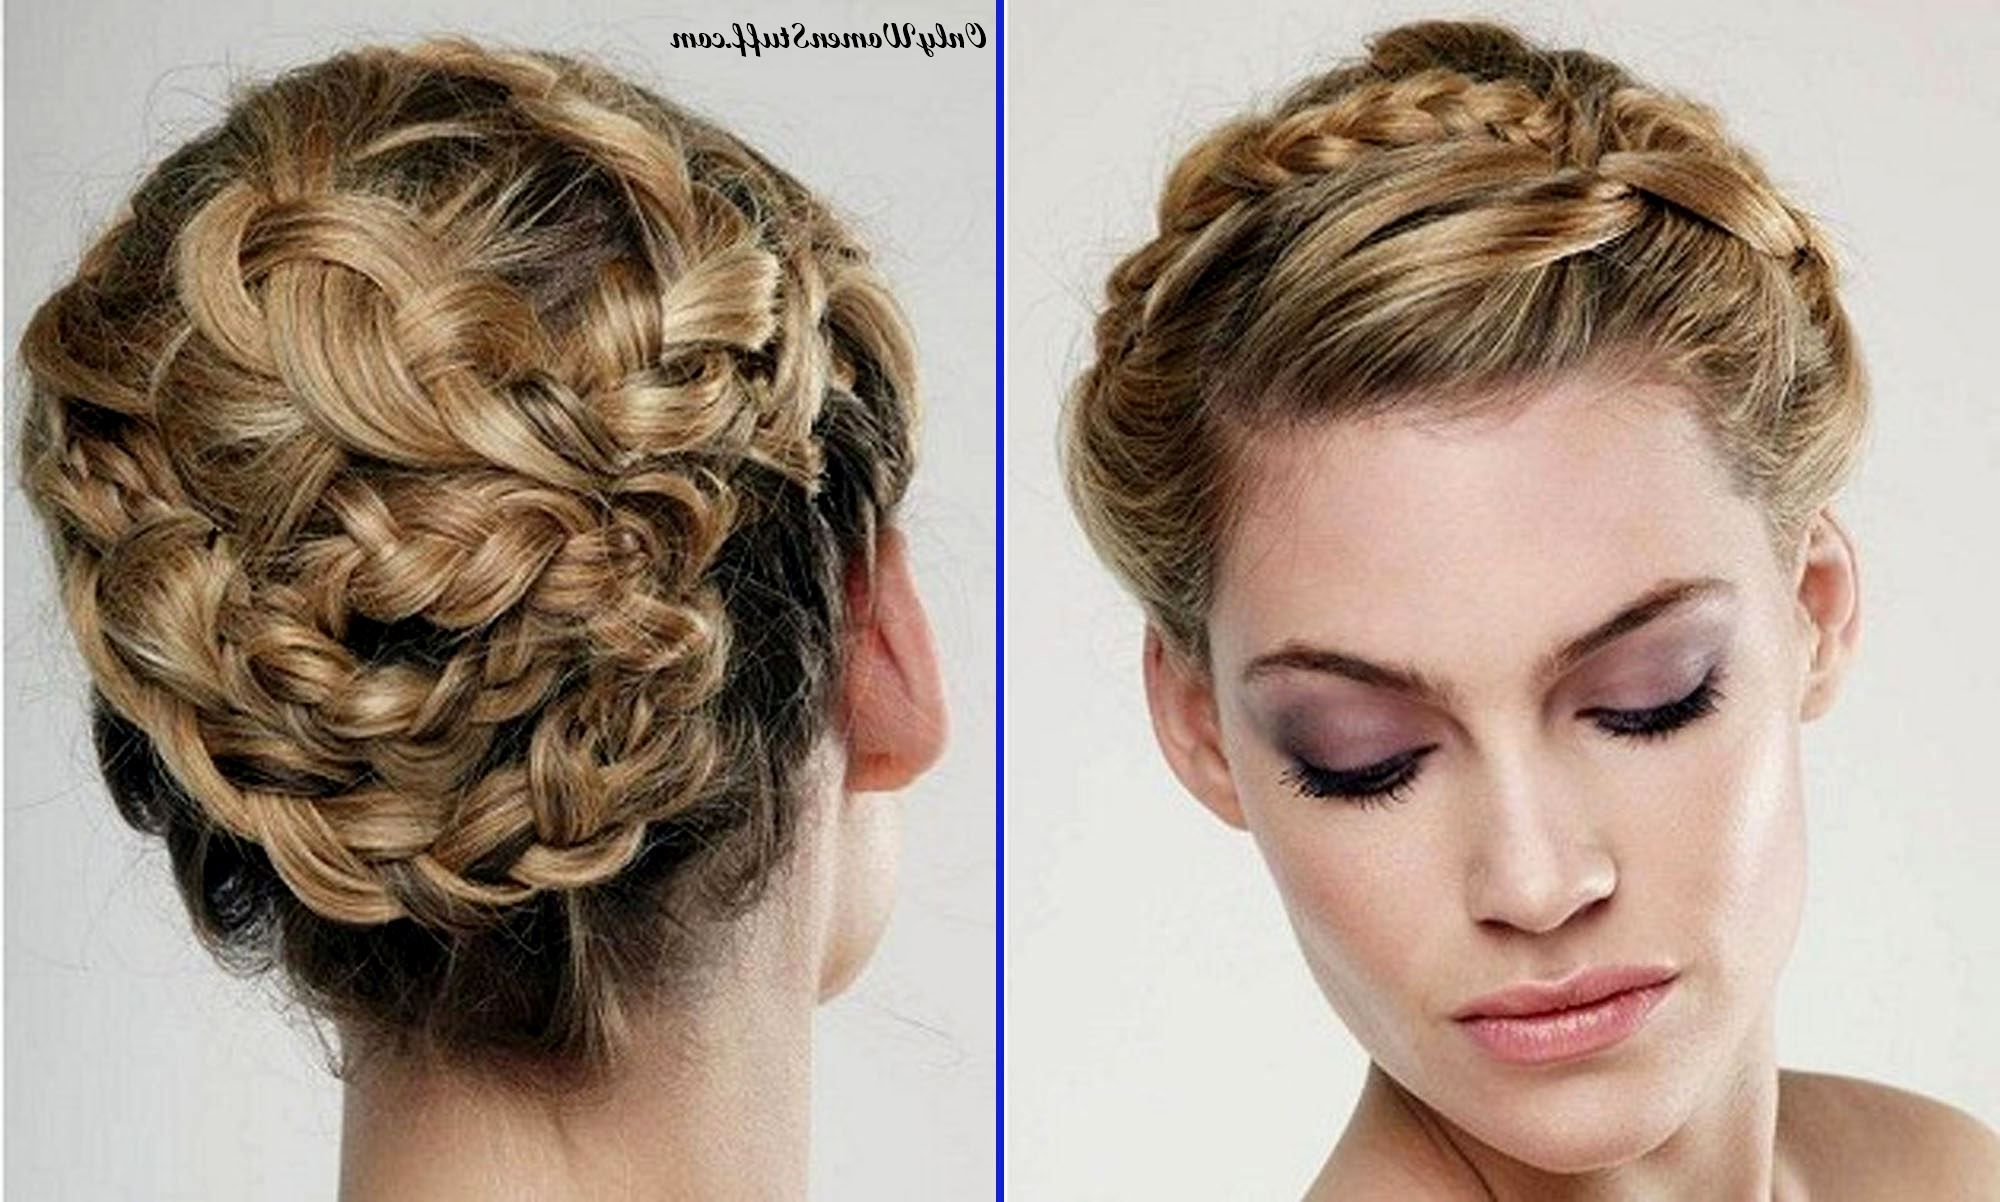 50+ Easy Prom Hairstyles & Updos Ideas (stepstep) Inside 2017 Simple Halfdo Wedding Hairstyles For Short Hair (View 13 of 20)